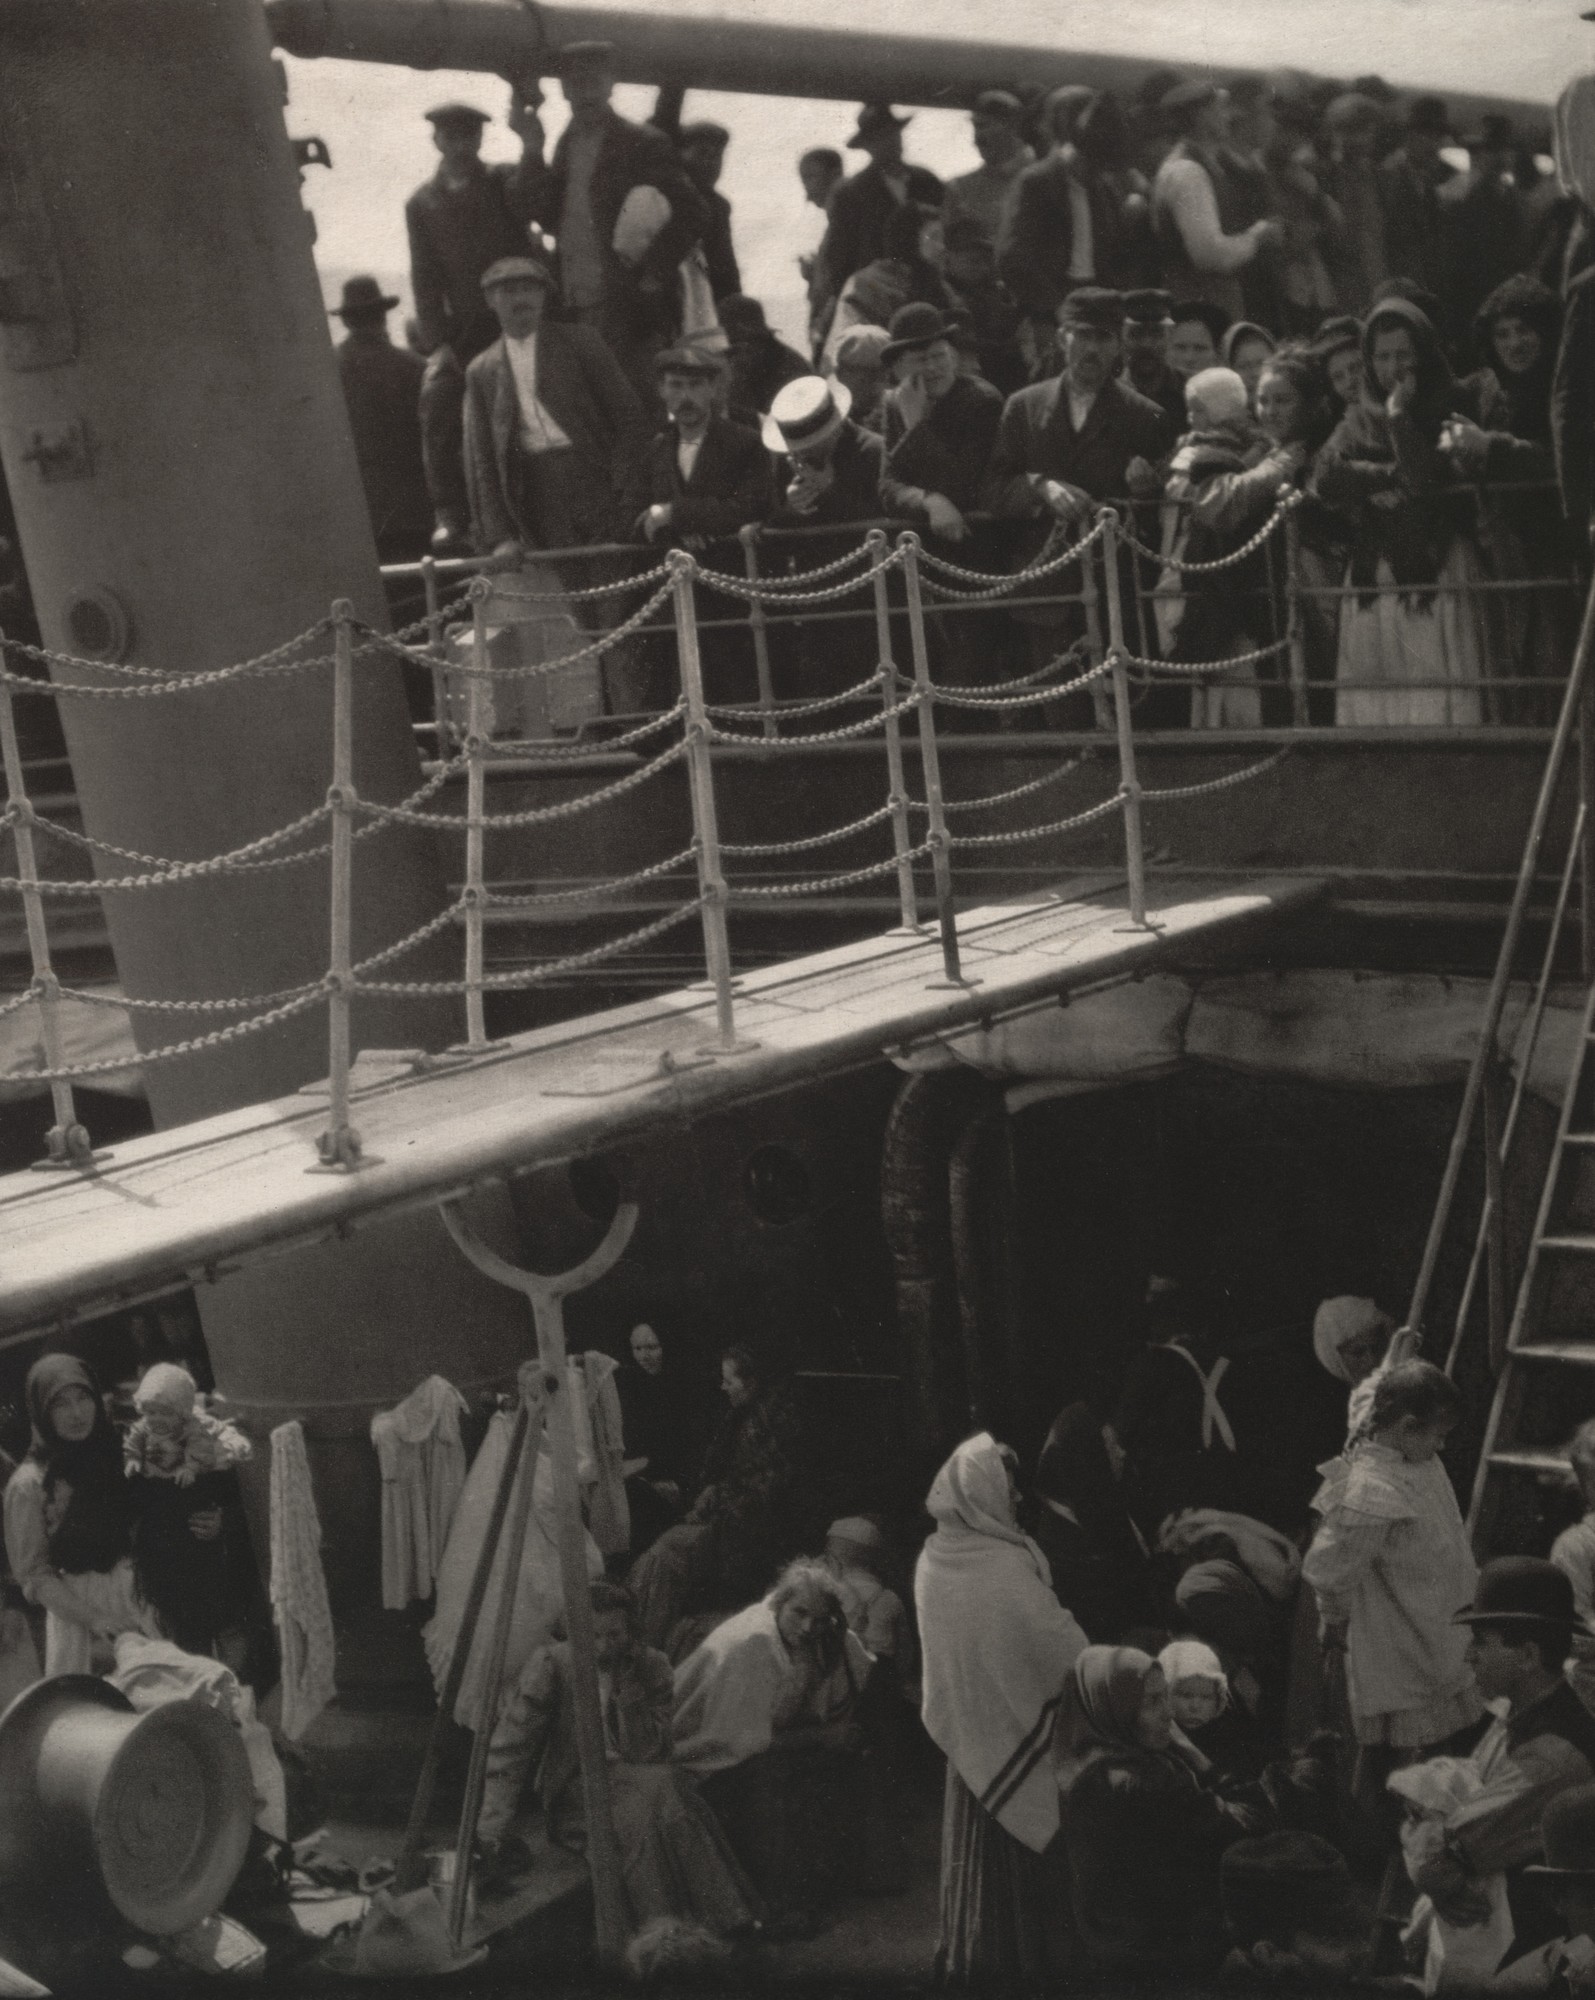 A vertically aligned black and white photo cropped and looking at two decks of a ship. Both the upper and lower decks are full of people. A gangplank leads from the left edge of the photograph to the upper deck.